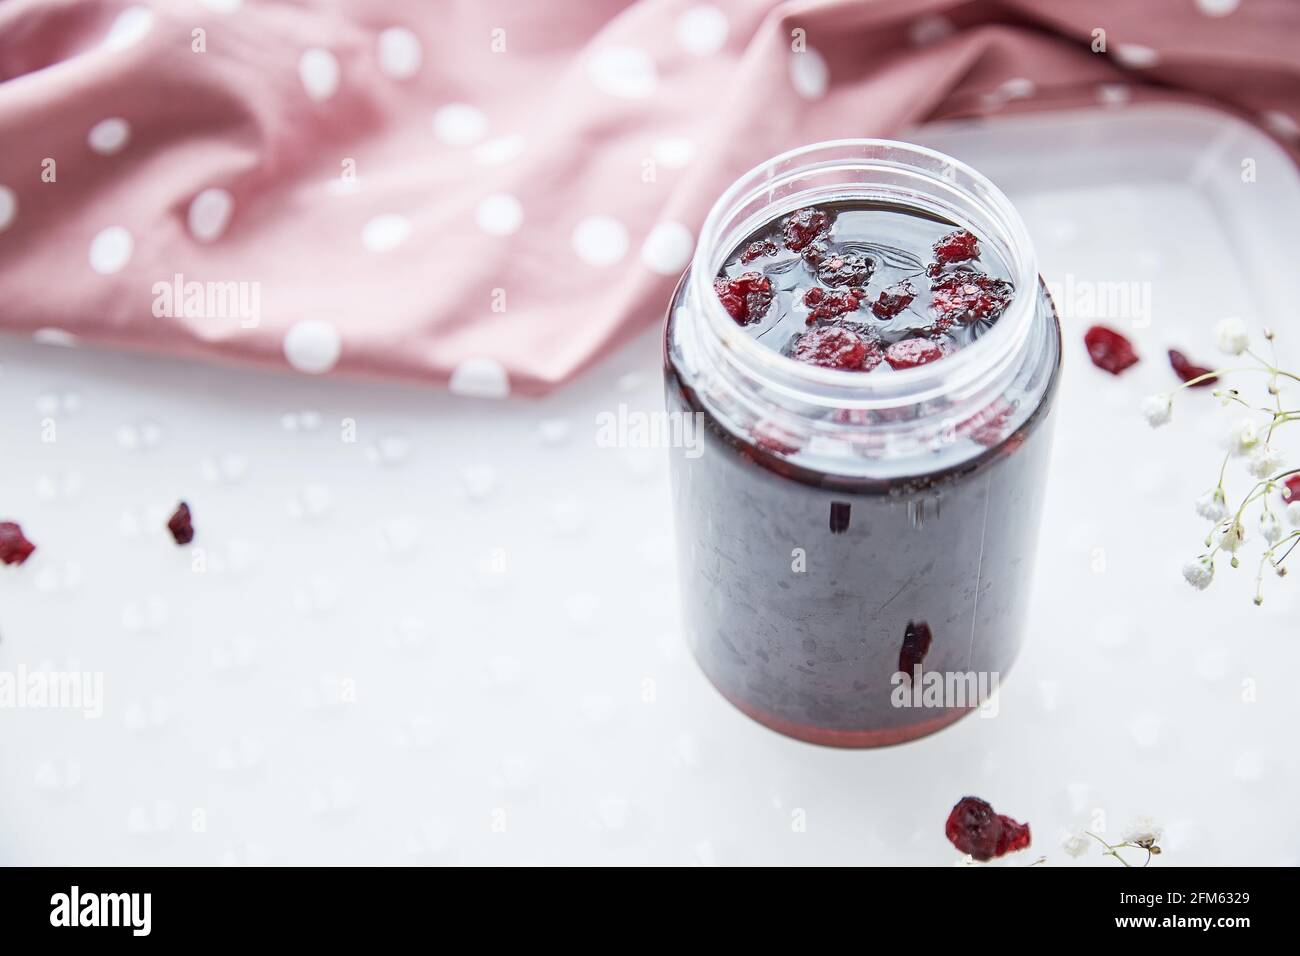 Healthy fermented honey product with cranberry, probiotics. Food preservative. Delicious recipe concept. Anti-viral food.  Stock Photo